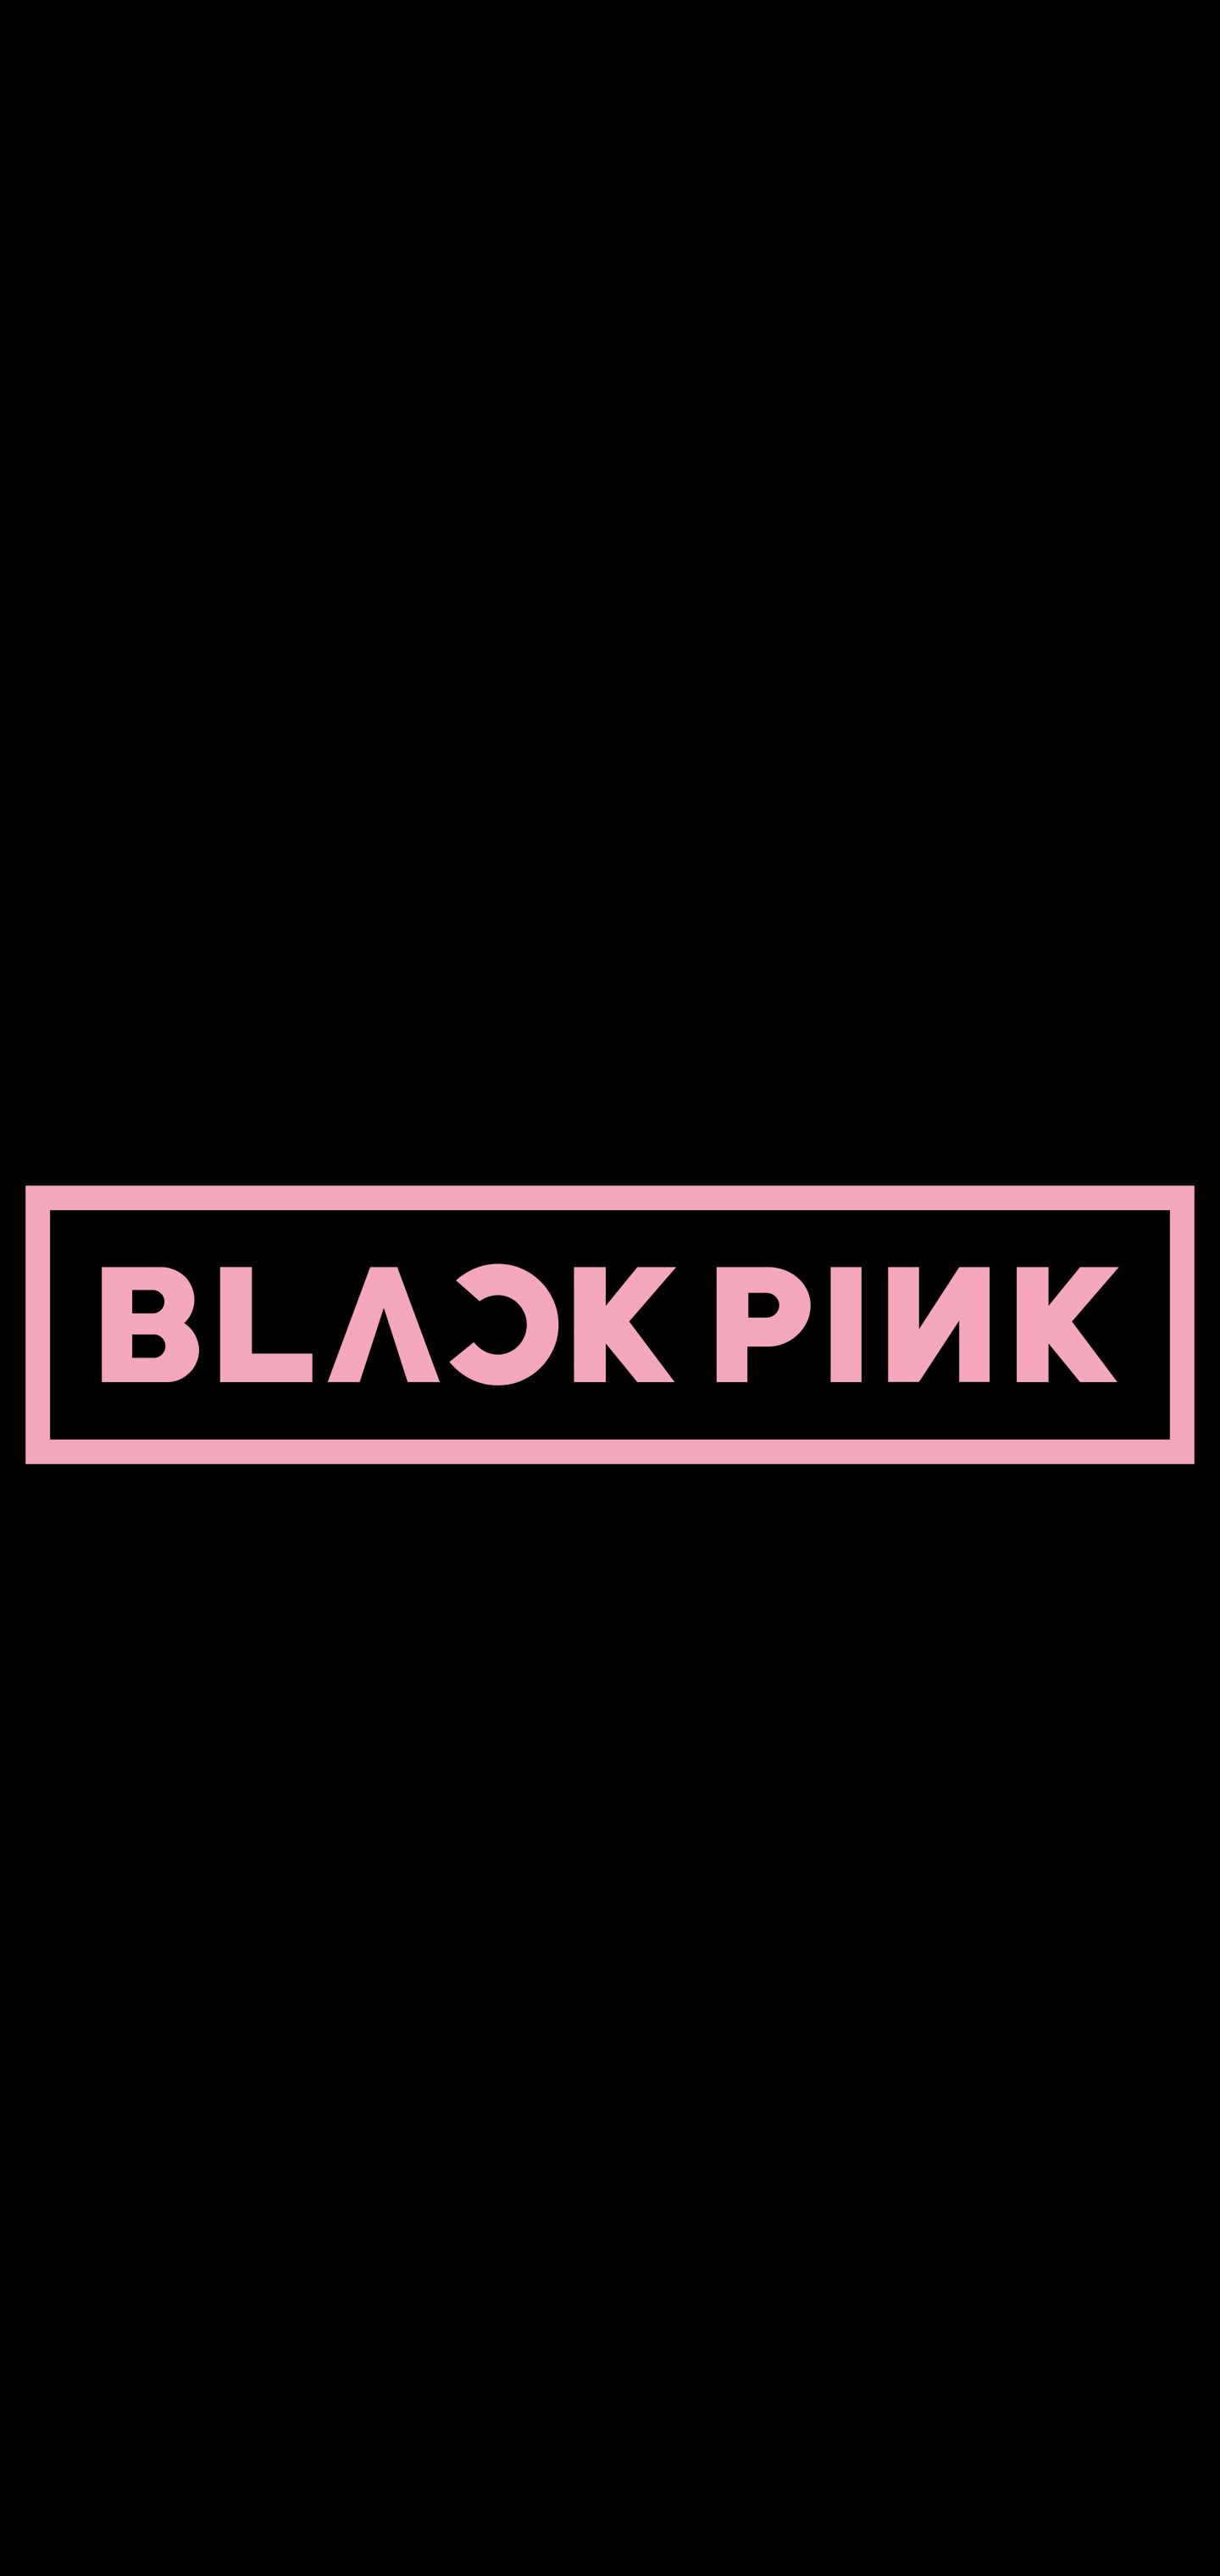 Made some very simple and minimalist Blackpink logo wallpaper